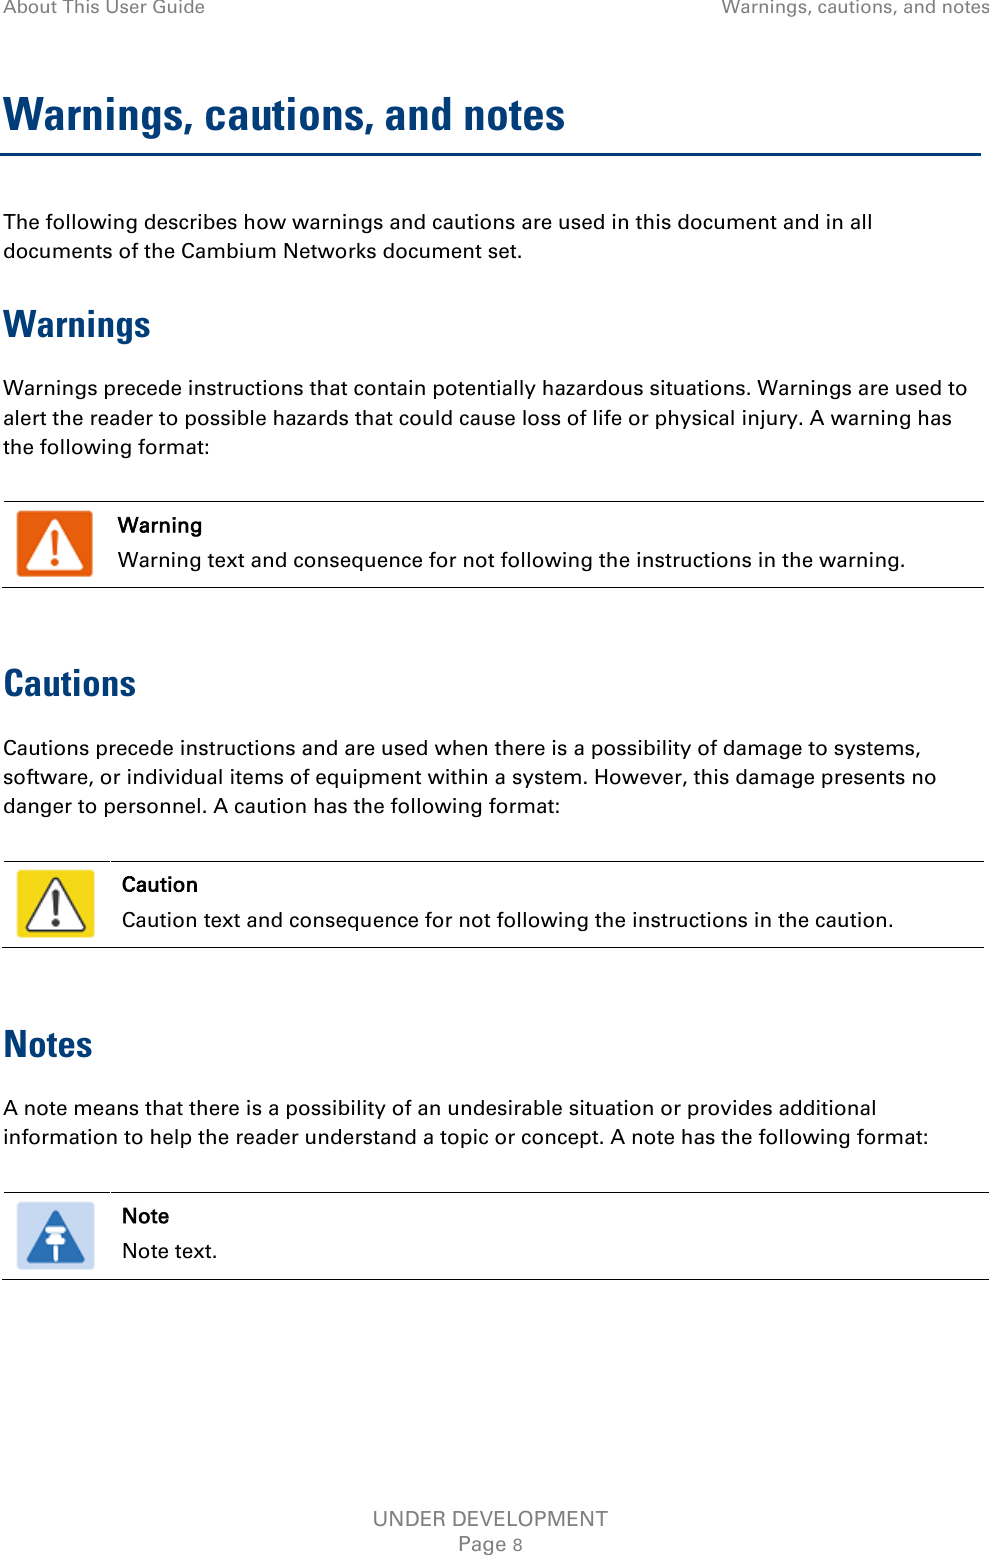 About This User Guide Warnings, cautions, and notes  Warnings, cautions, and notes The following describes how warnings and cautions are used in this document and in all documents of the Cambium Networks document set. Warnings Warnings precede instructions that contain potentially hazardous situations. Warnings are used to alert the reader to possible hazards that could cause loss of life or physical injury. A warning has the following format:   Warning Warning text and consequence for not following the instructions in the warning.  Cautions Cautions precede instructions and are used when there is a possibility of damage to systems, software, or individual items of equipment within a system. However, this damage presents no danger to personnel. A caution has the following format:   Caution Caution text and consequence for not following the instructions in the caution.  Notes A note means that there is a possibility of an undesirable situation or provides additional information to help the reader understand a topic or concept. A note has the following format:   Note Note text.  UNDER DEVELOPMENT Page 8 